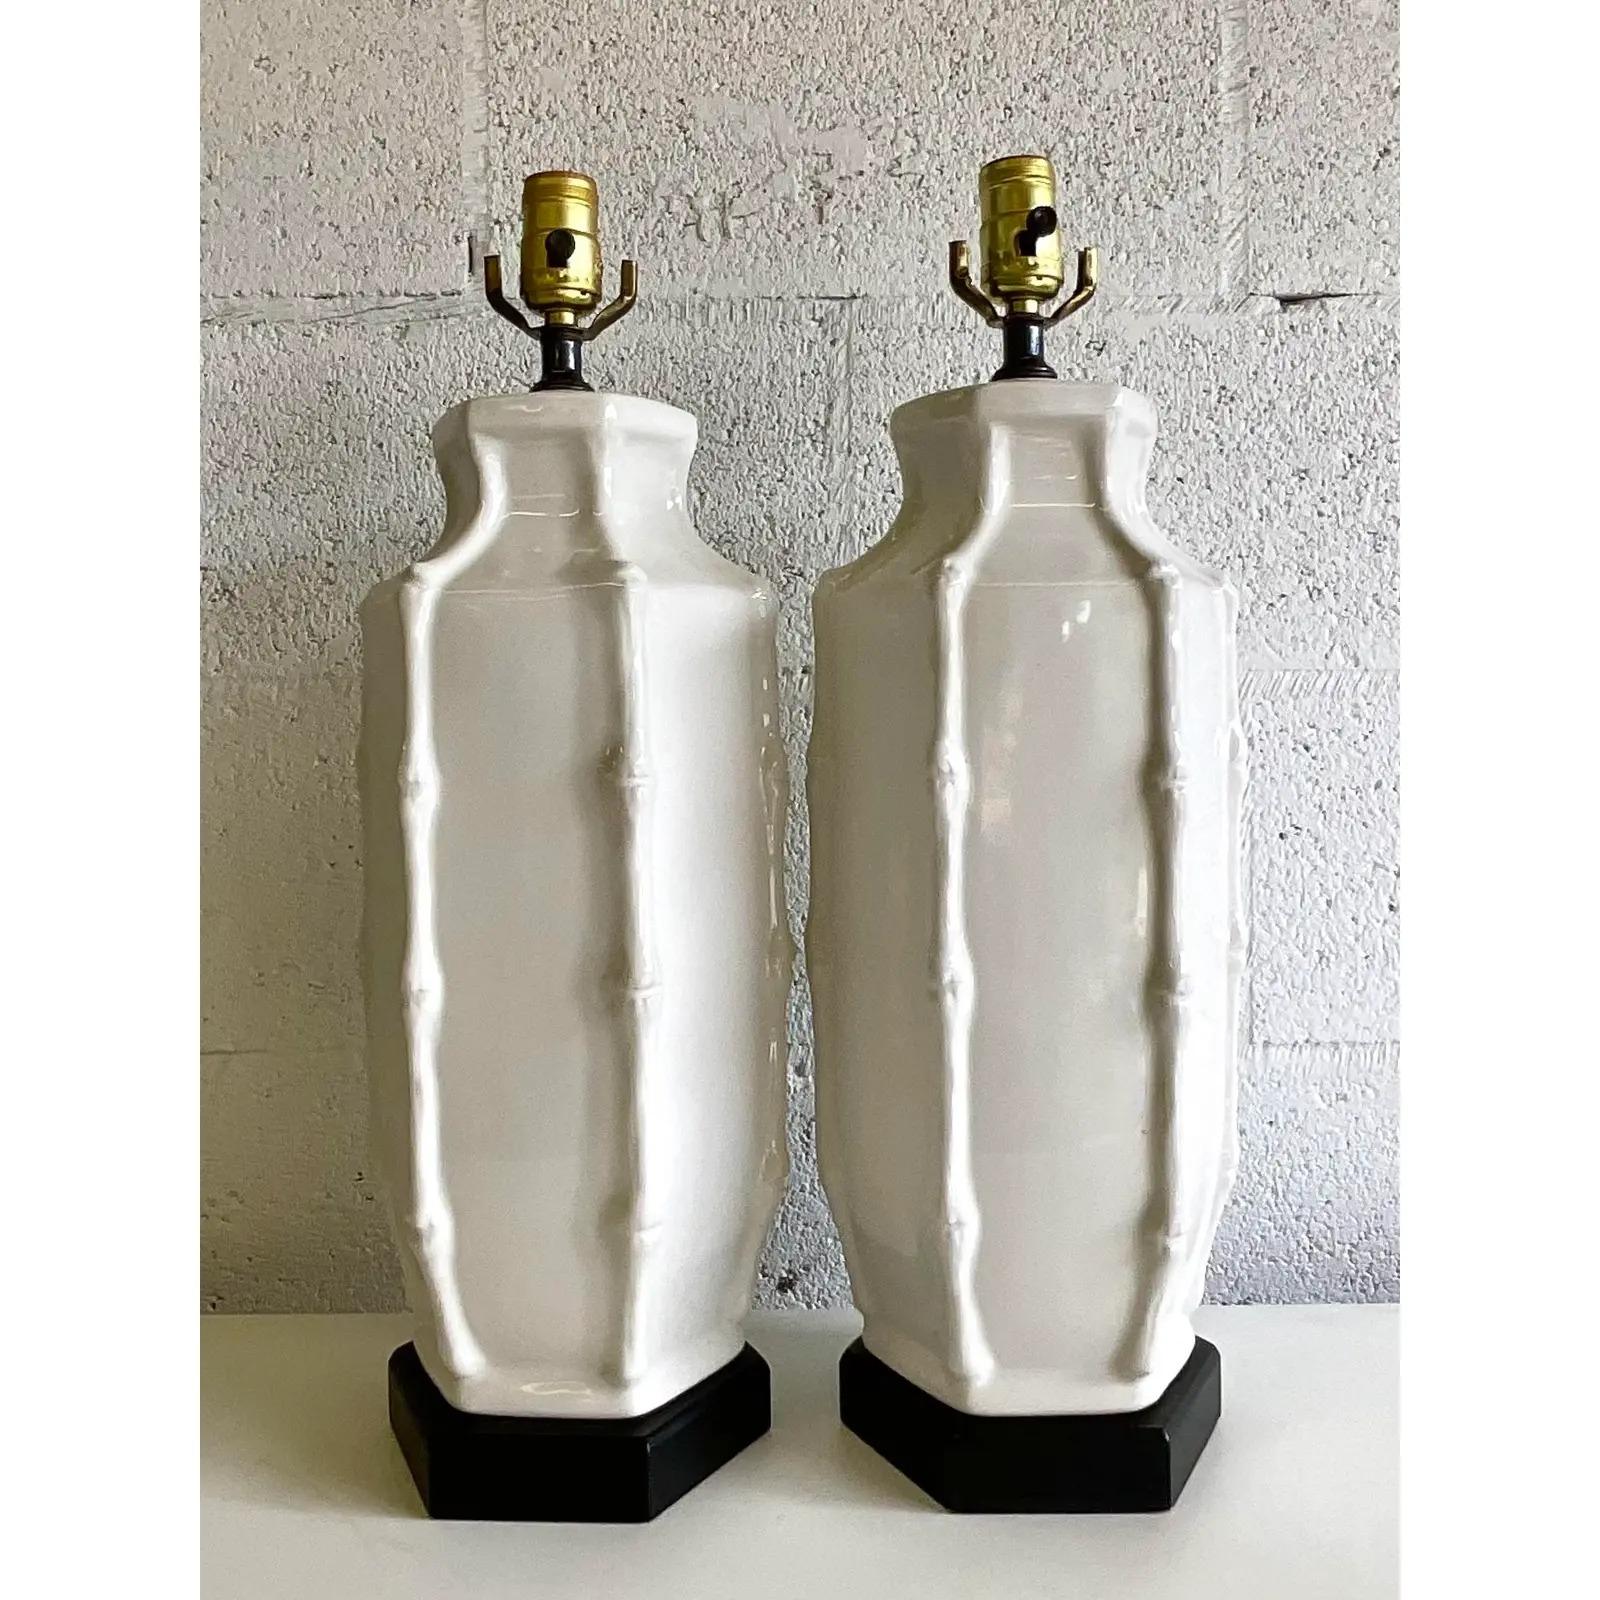 Gorgeous pair of vintage MCM glazed ceramic table lamps. Faux bamboo trim and a bright white finish. Rest on black wooden plinths. Acquired from a Palm Beach estate.